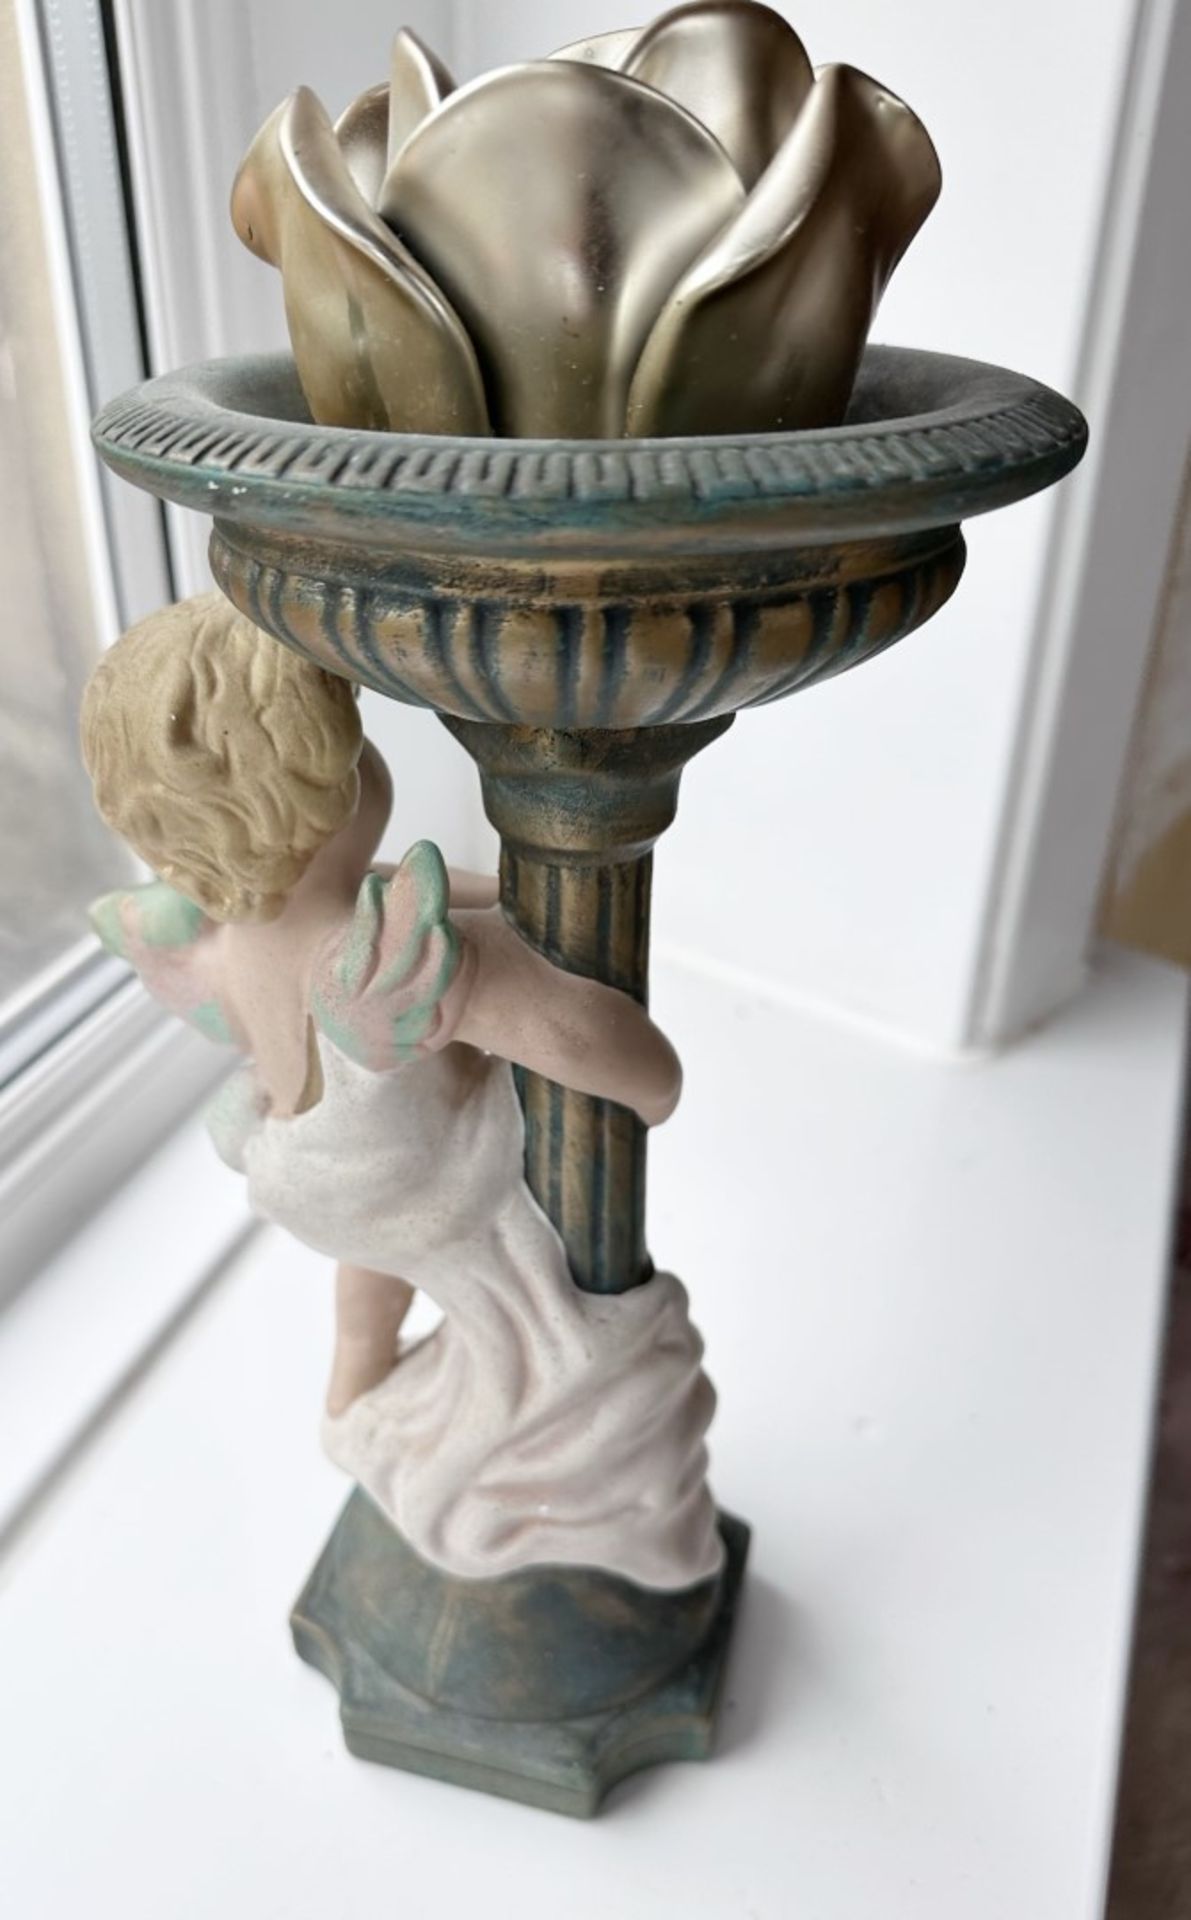 2 x Vintage French Porcelain Cherub Candle Holders - Image 6 of 9